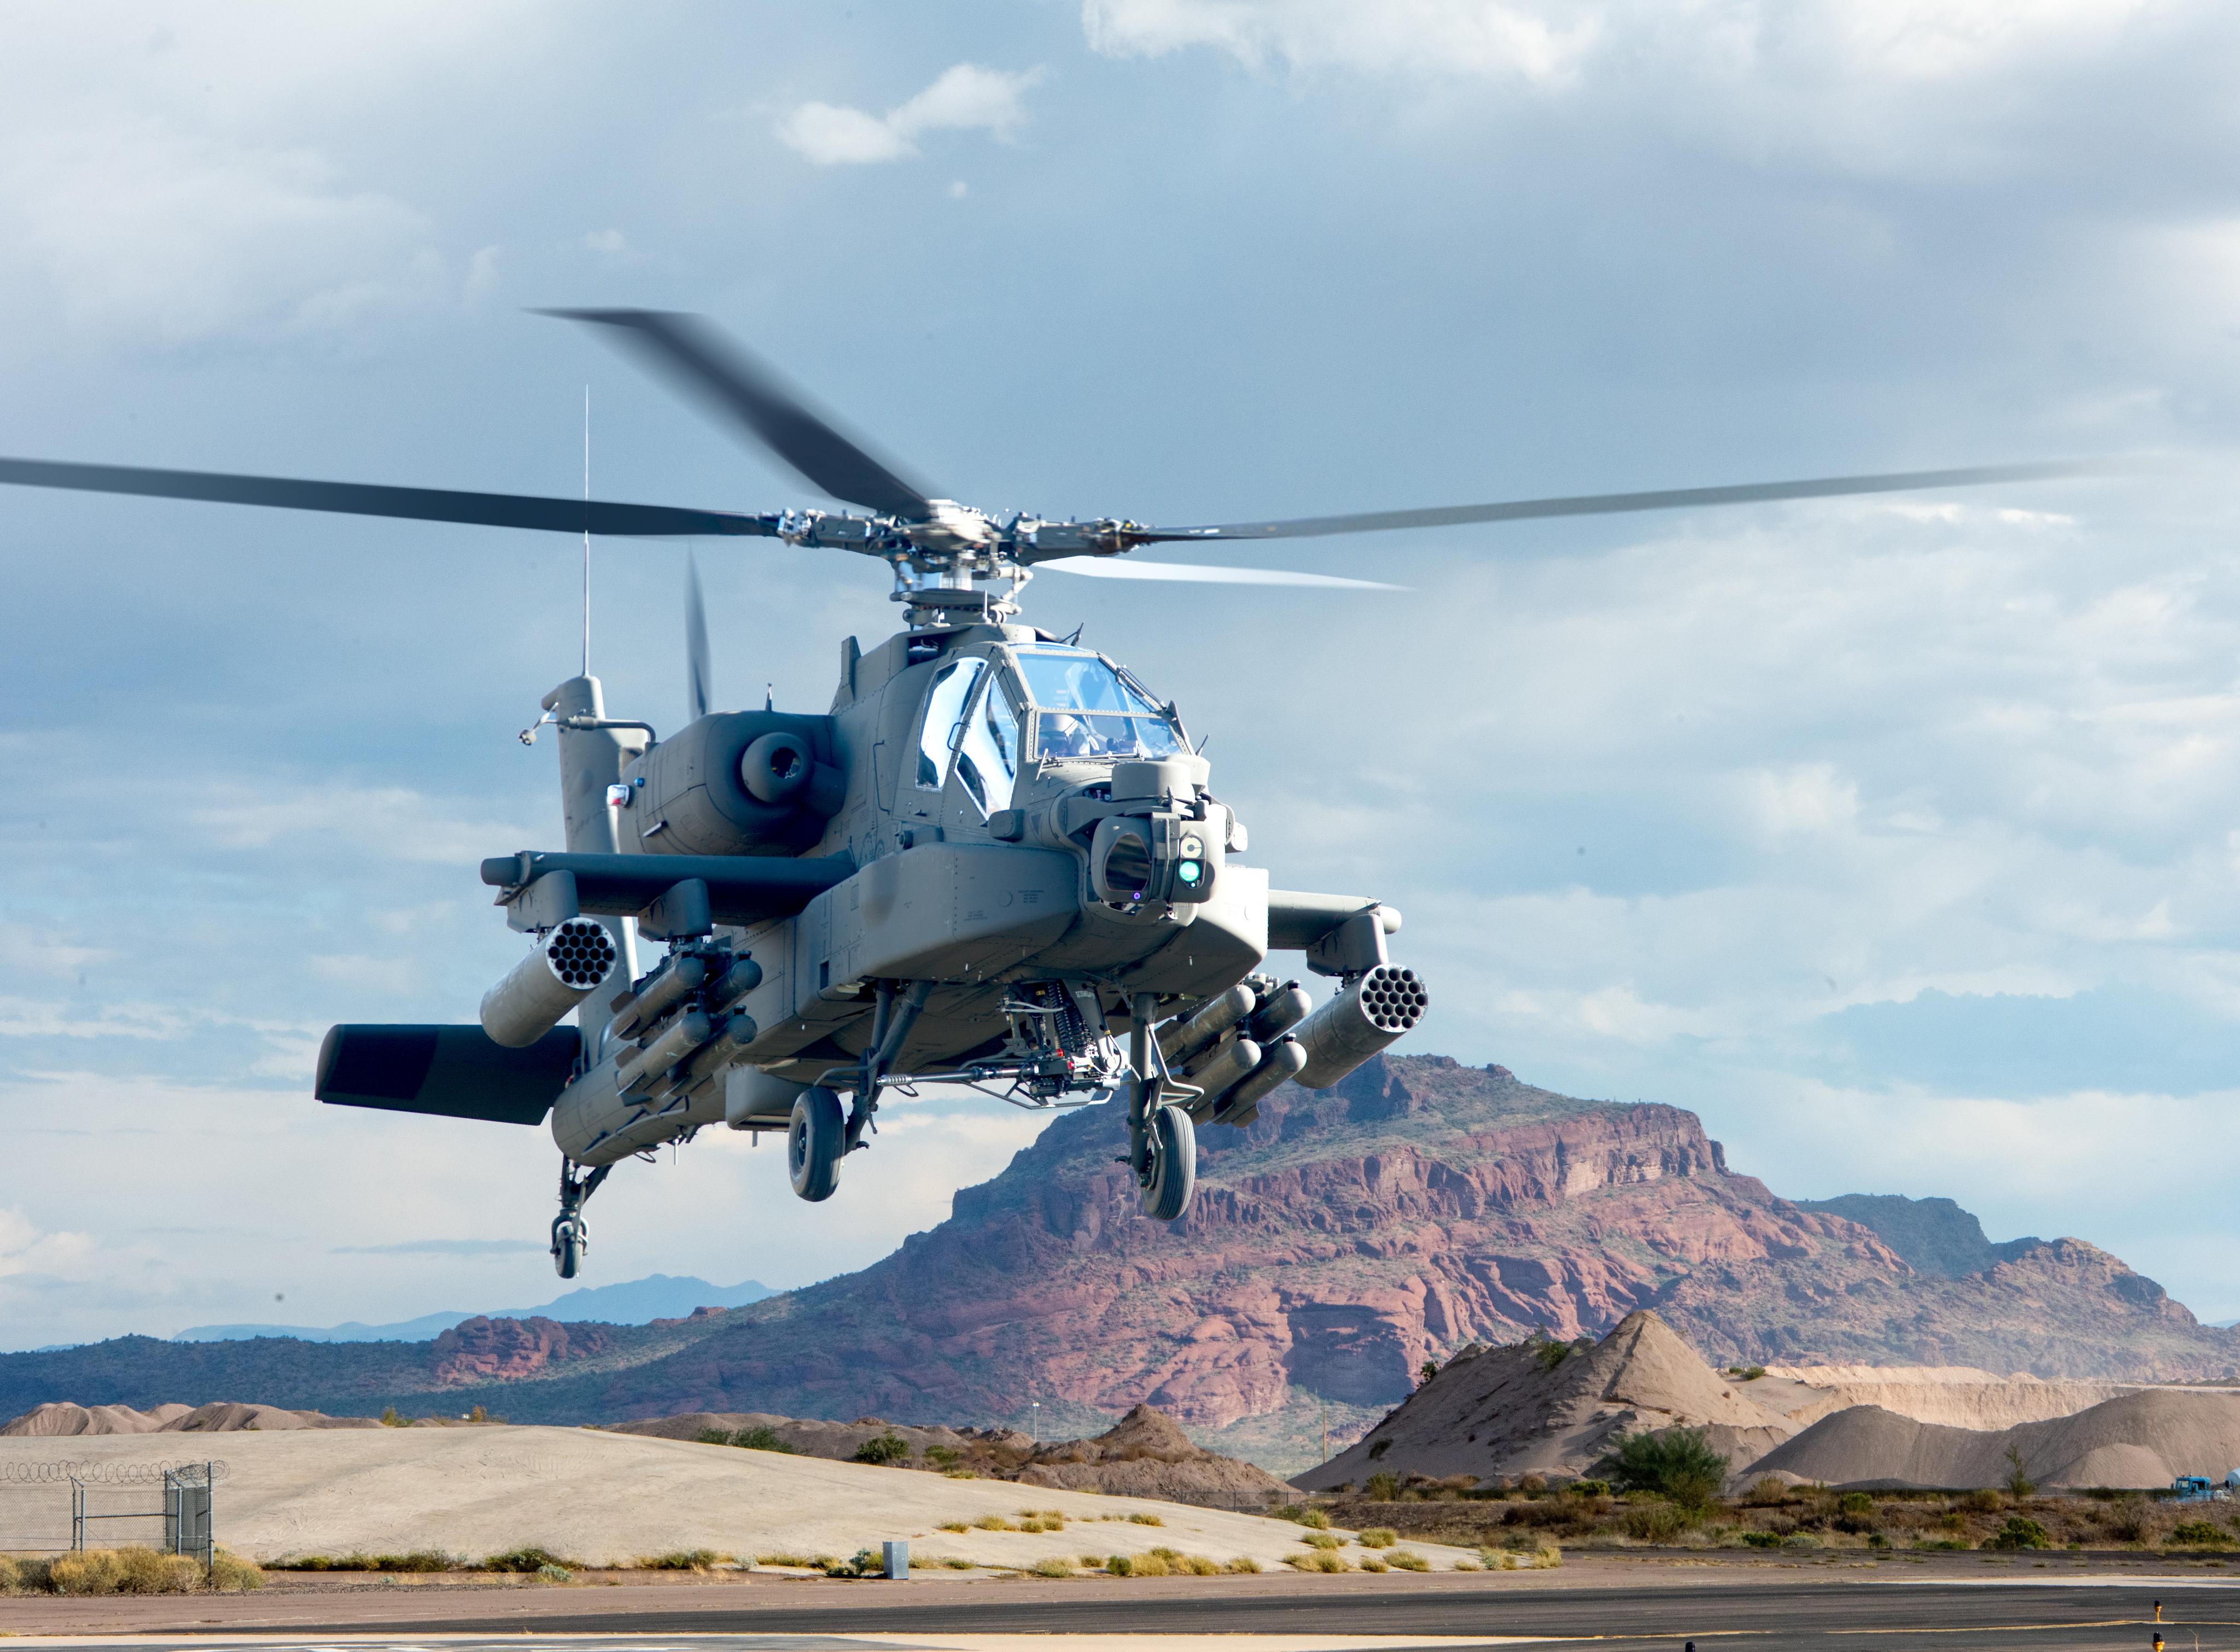 Press Release - Meant  for  Foreign  Military Sales  and  U.S. Army , Boeing  to  Produce 184 Apaches  ,  Australia's First Included.